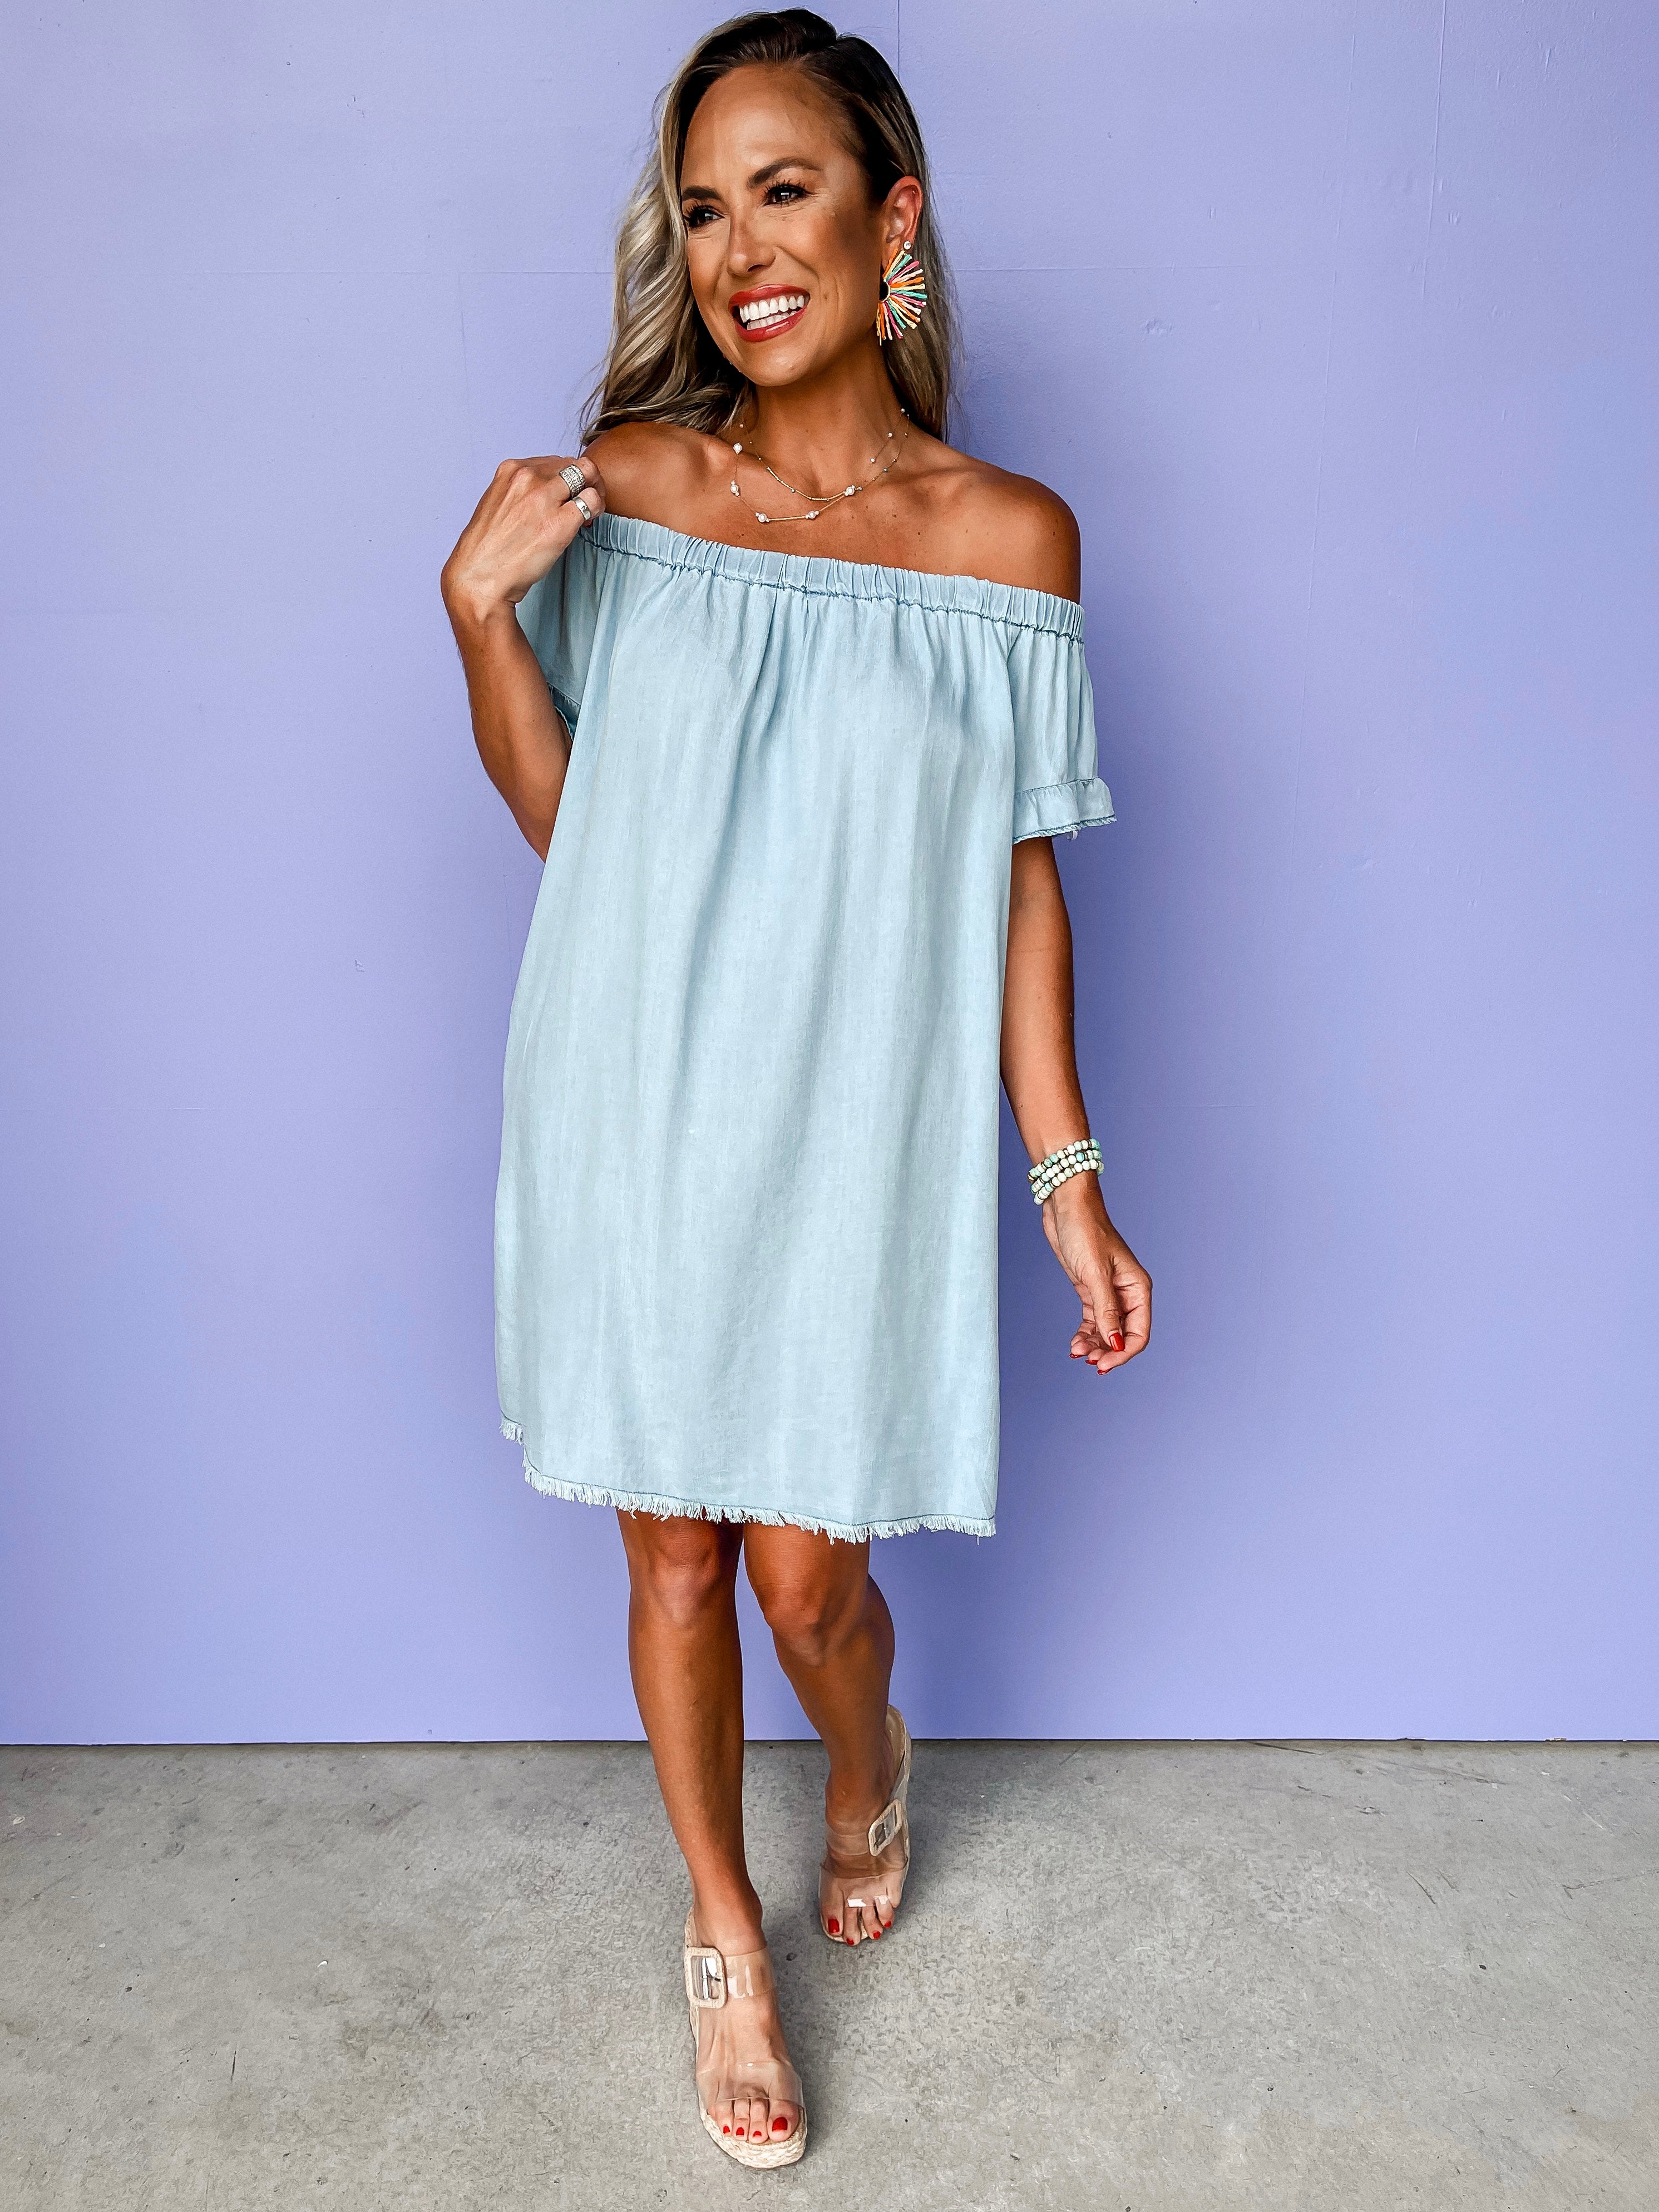 Thoughtful Words Off The Shoulder Dress